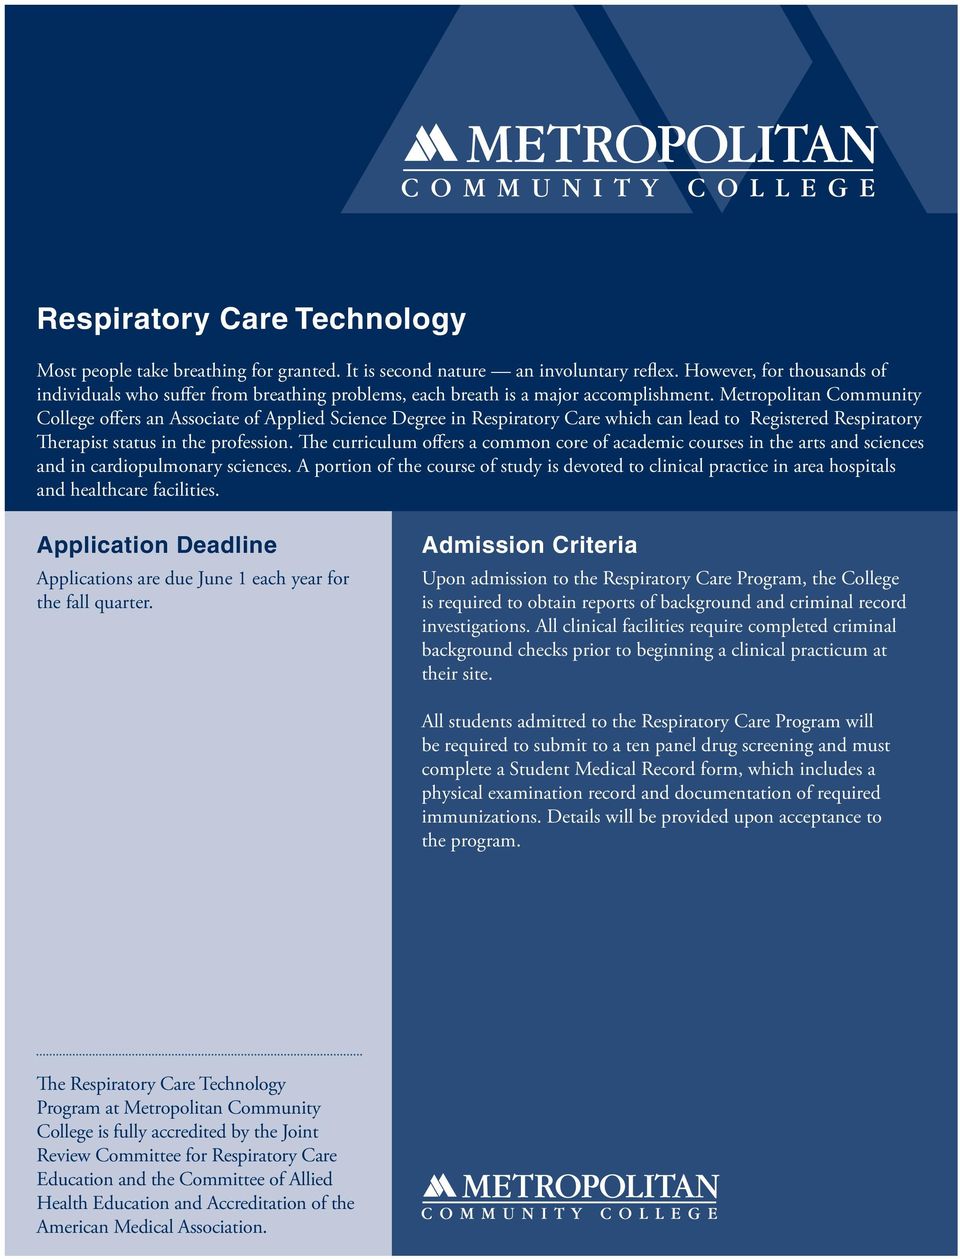 Metropolitan Community College offers an Associate of Applied Science Degree in Respiratory Care which can lead to Registered Respiratory Therapist status in the profession.